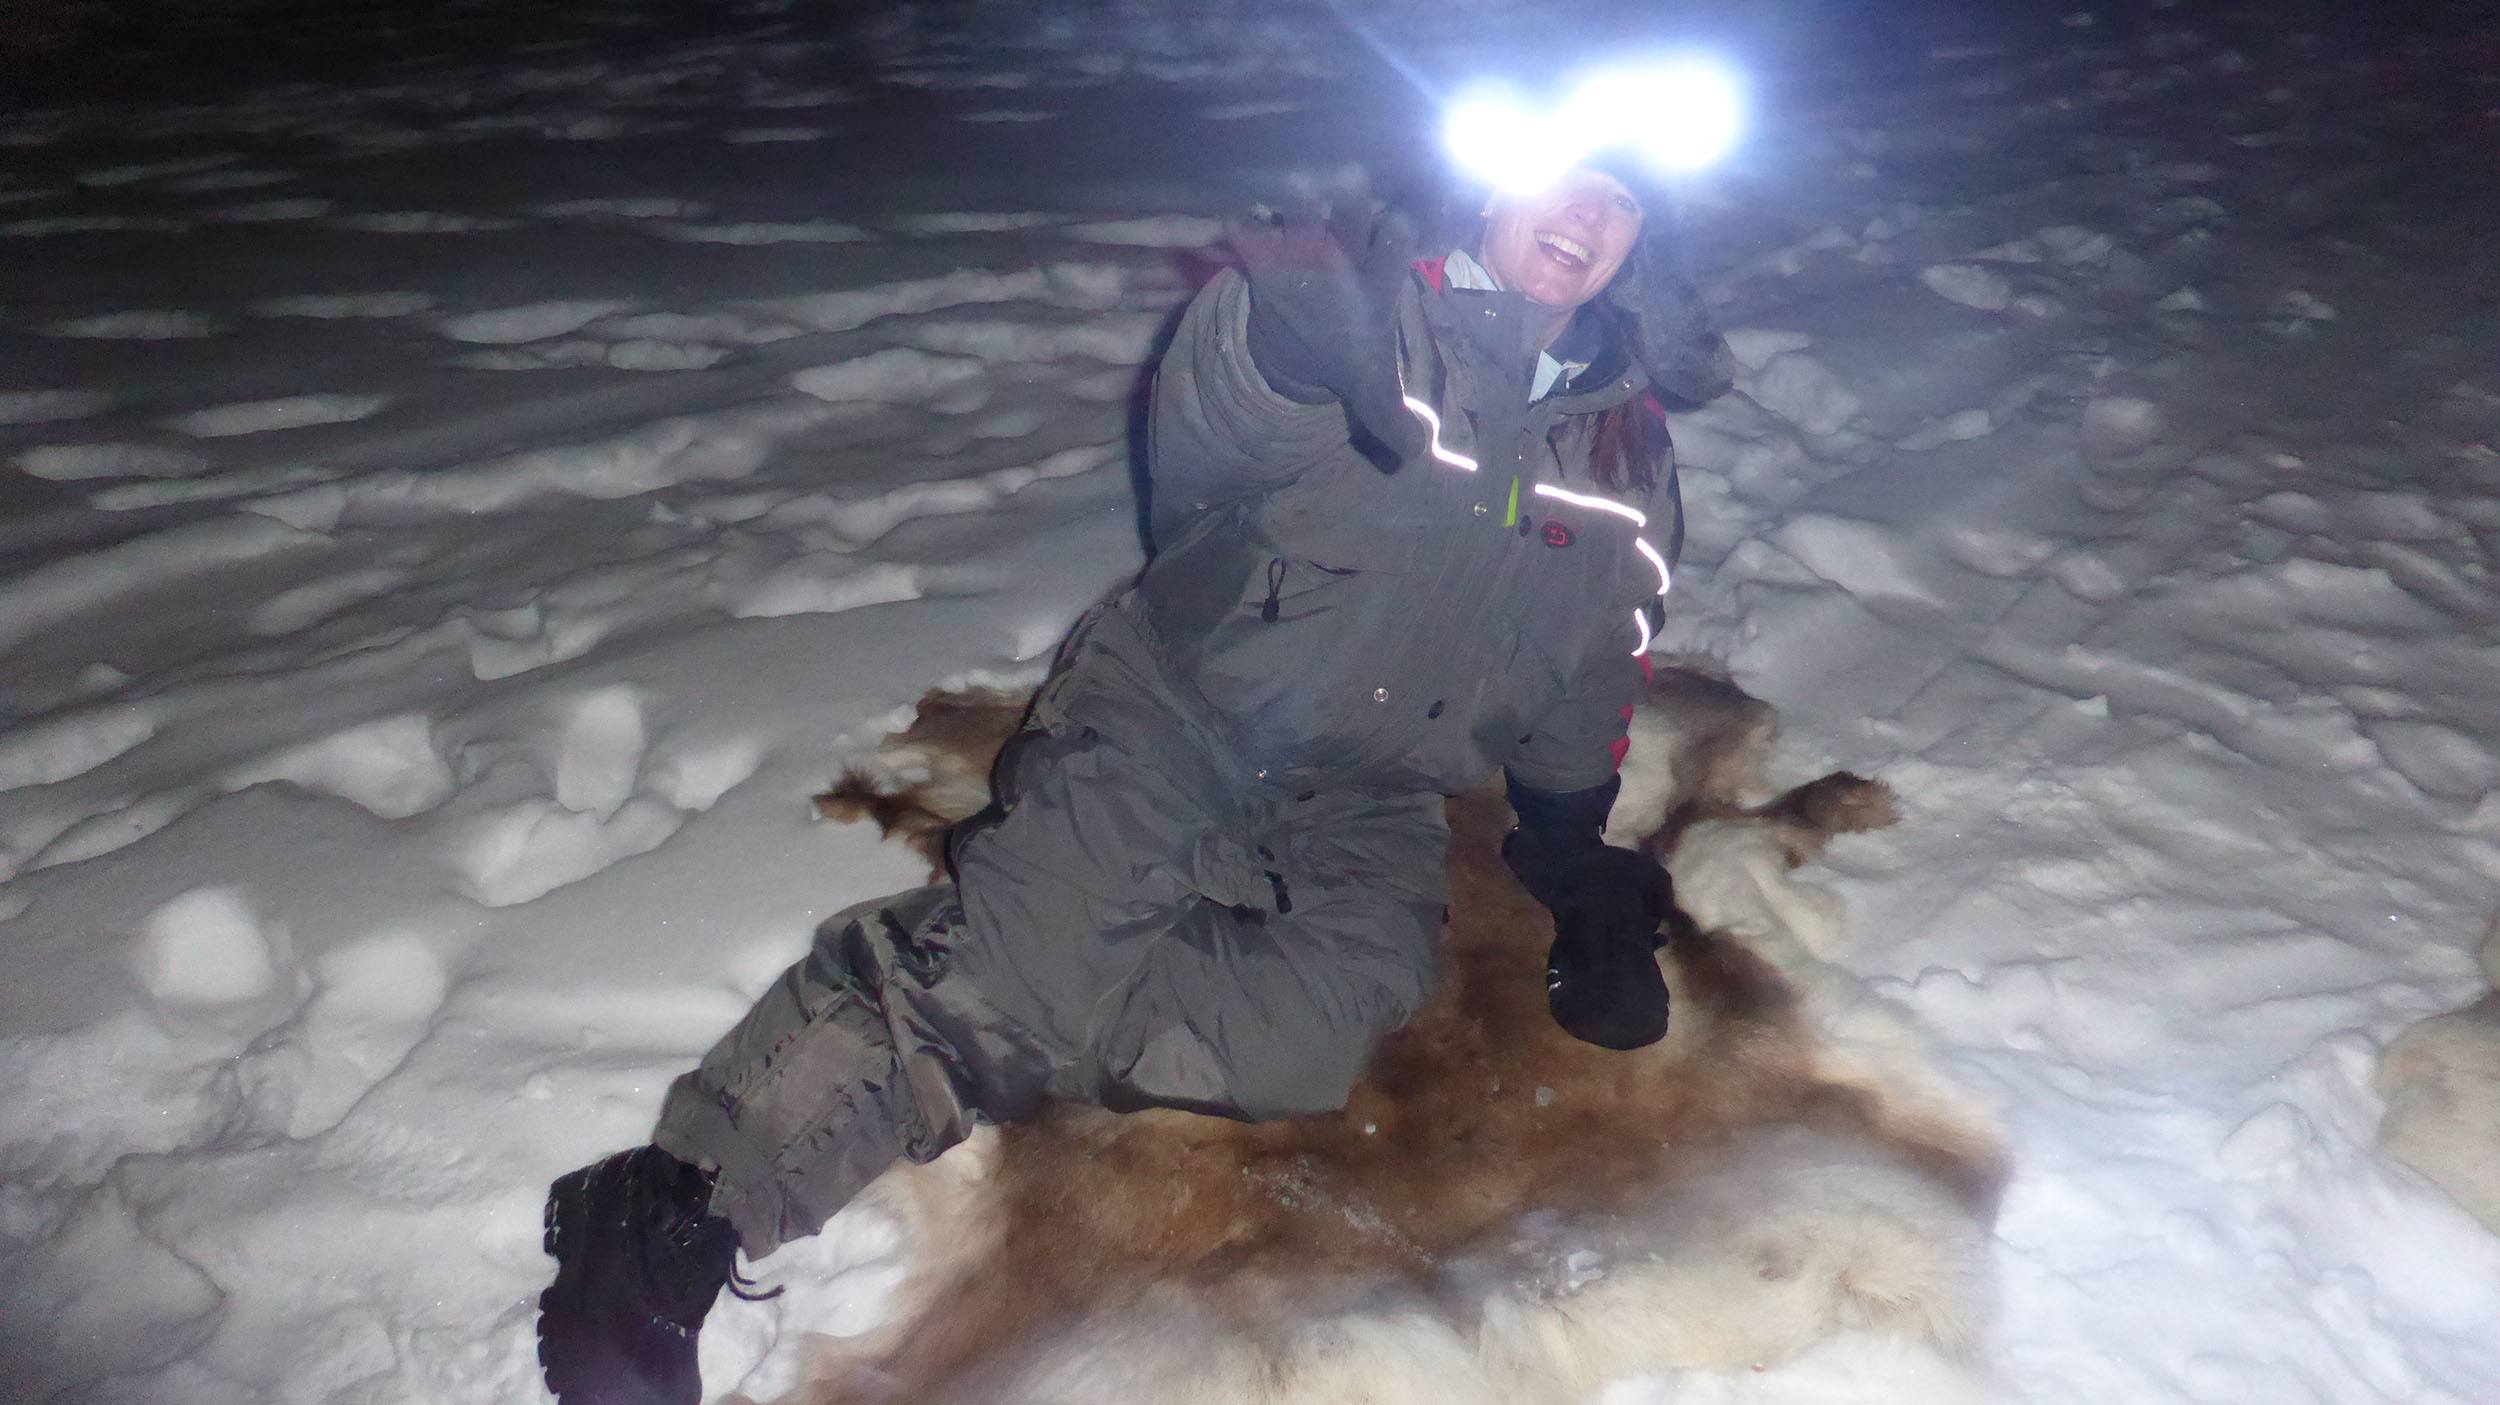 Kylie lying on a reindeer skin while ice fishing at Camp Alta in Sweden